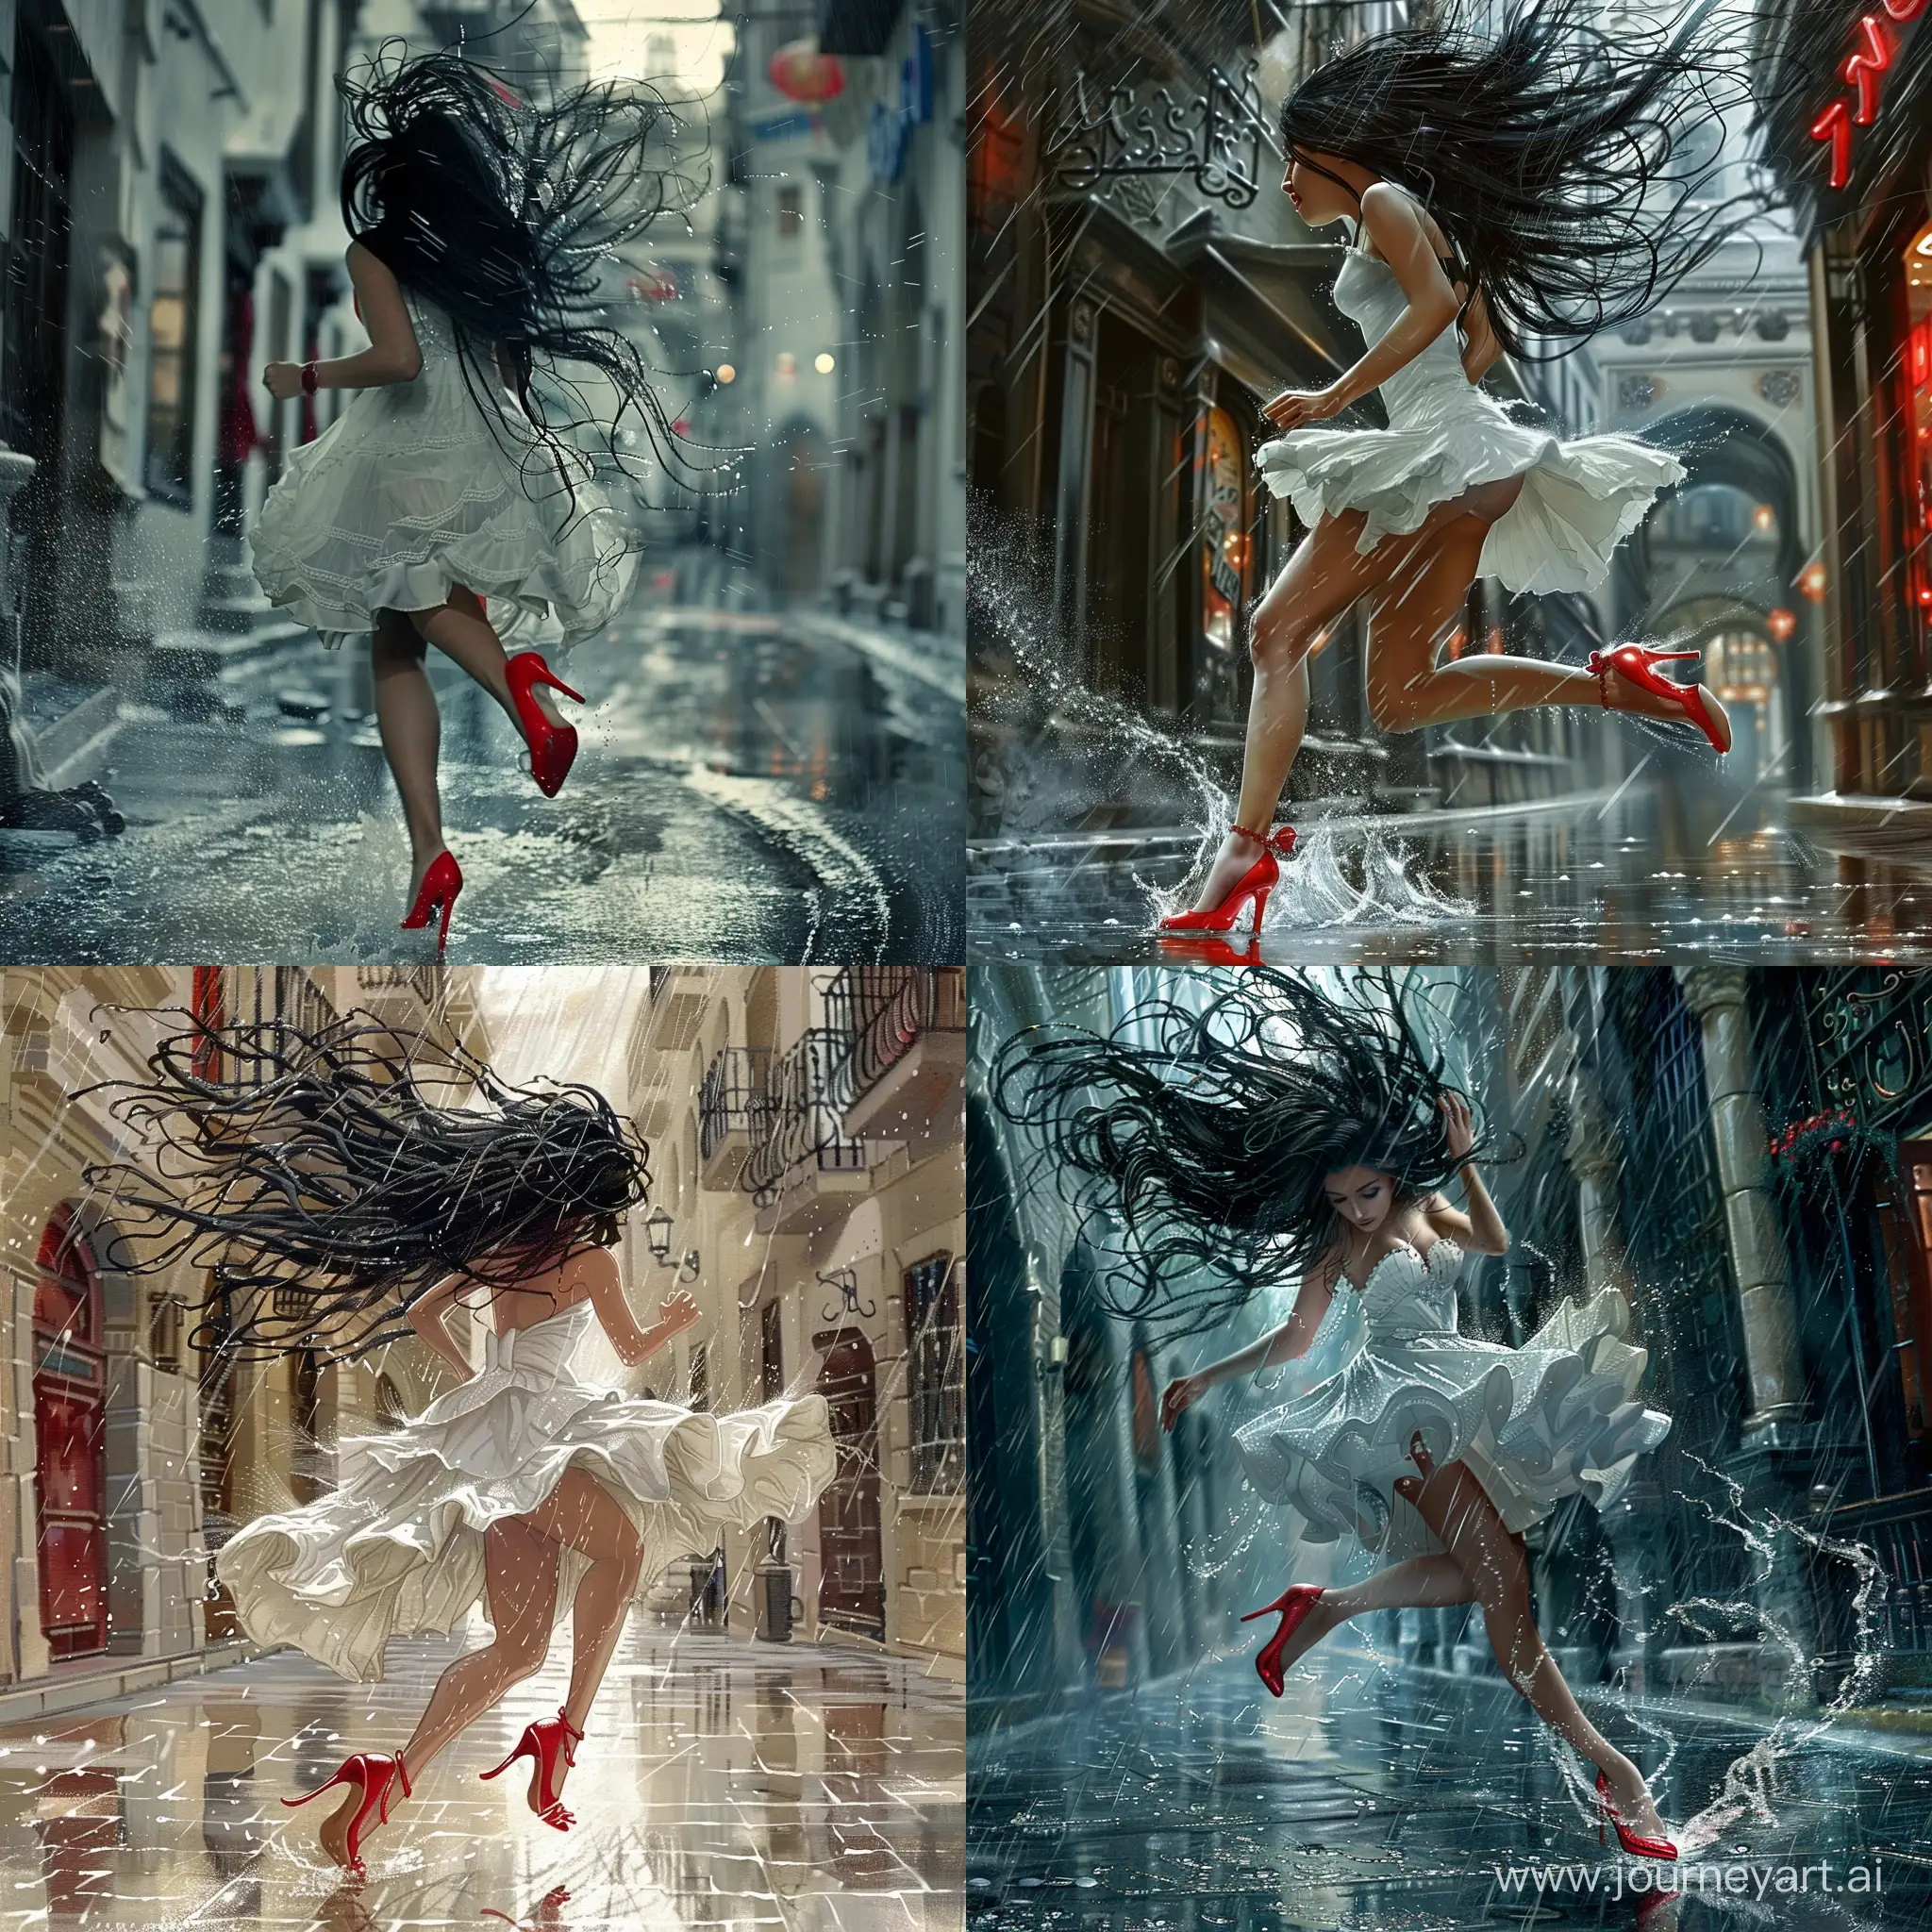 a Persian tall girl with black hair and white dress and red high heels, running in a street under the rain and her hair and dress are wet